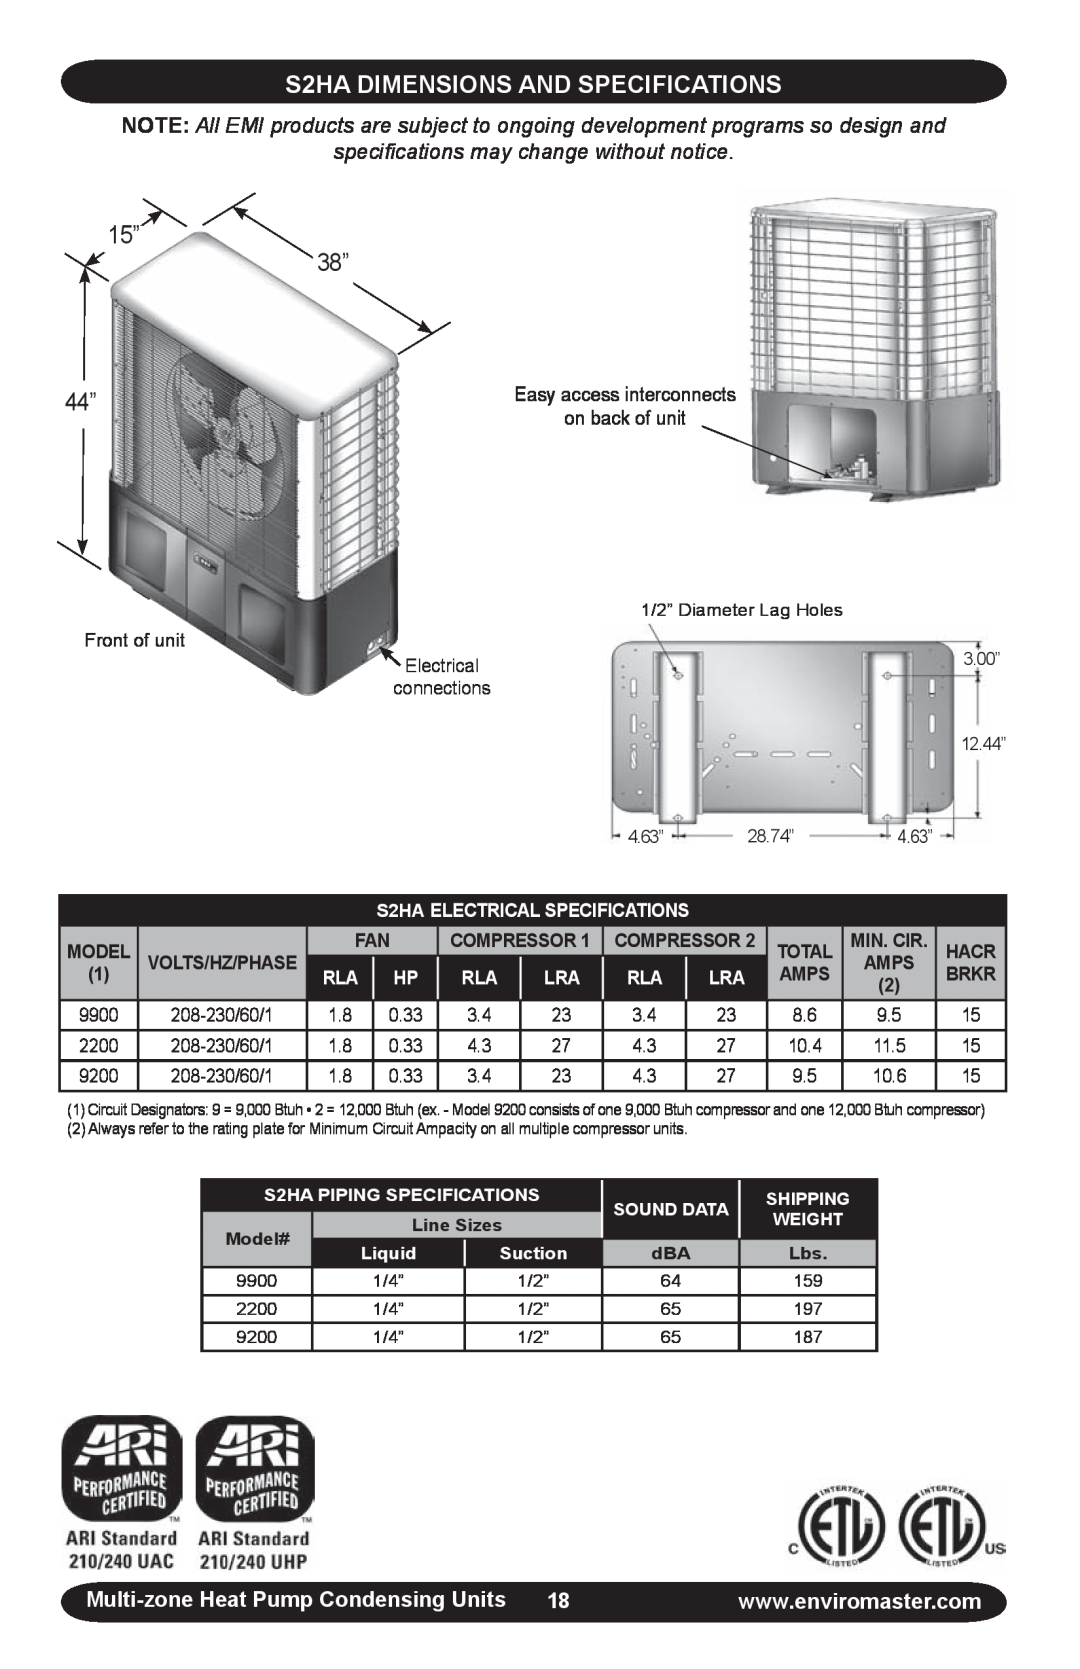 EMI EMI Corp S2HA DIMENSIONS AND SPECIFICATIONS, speciﬁcations may change without notice, Model, Compressor, Total, Hacr 